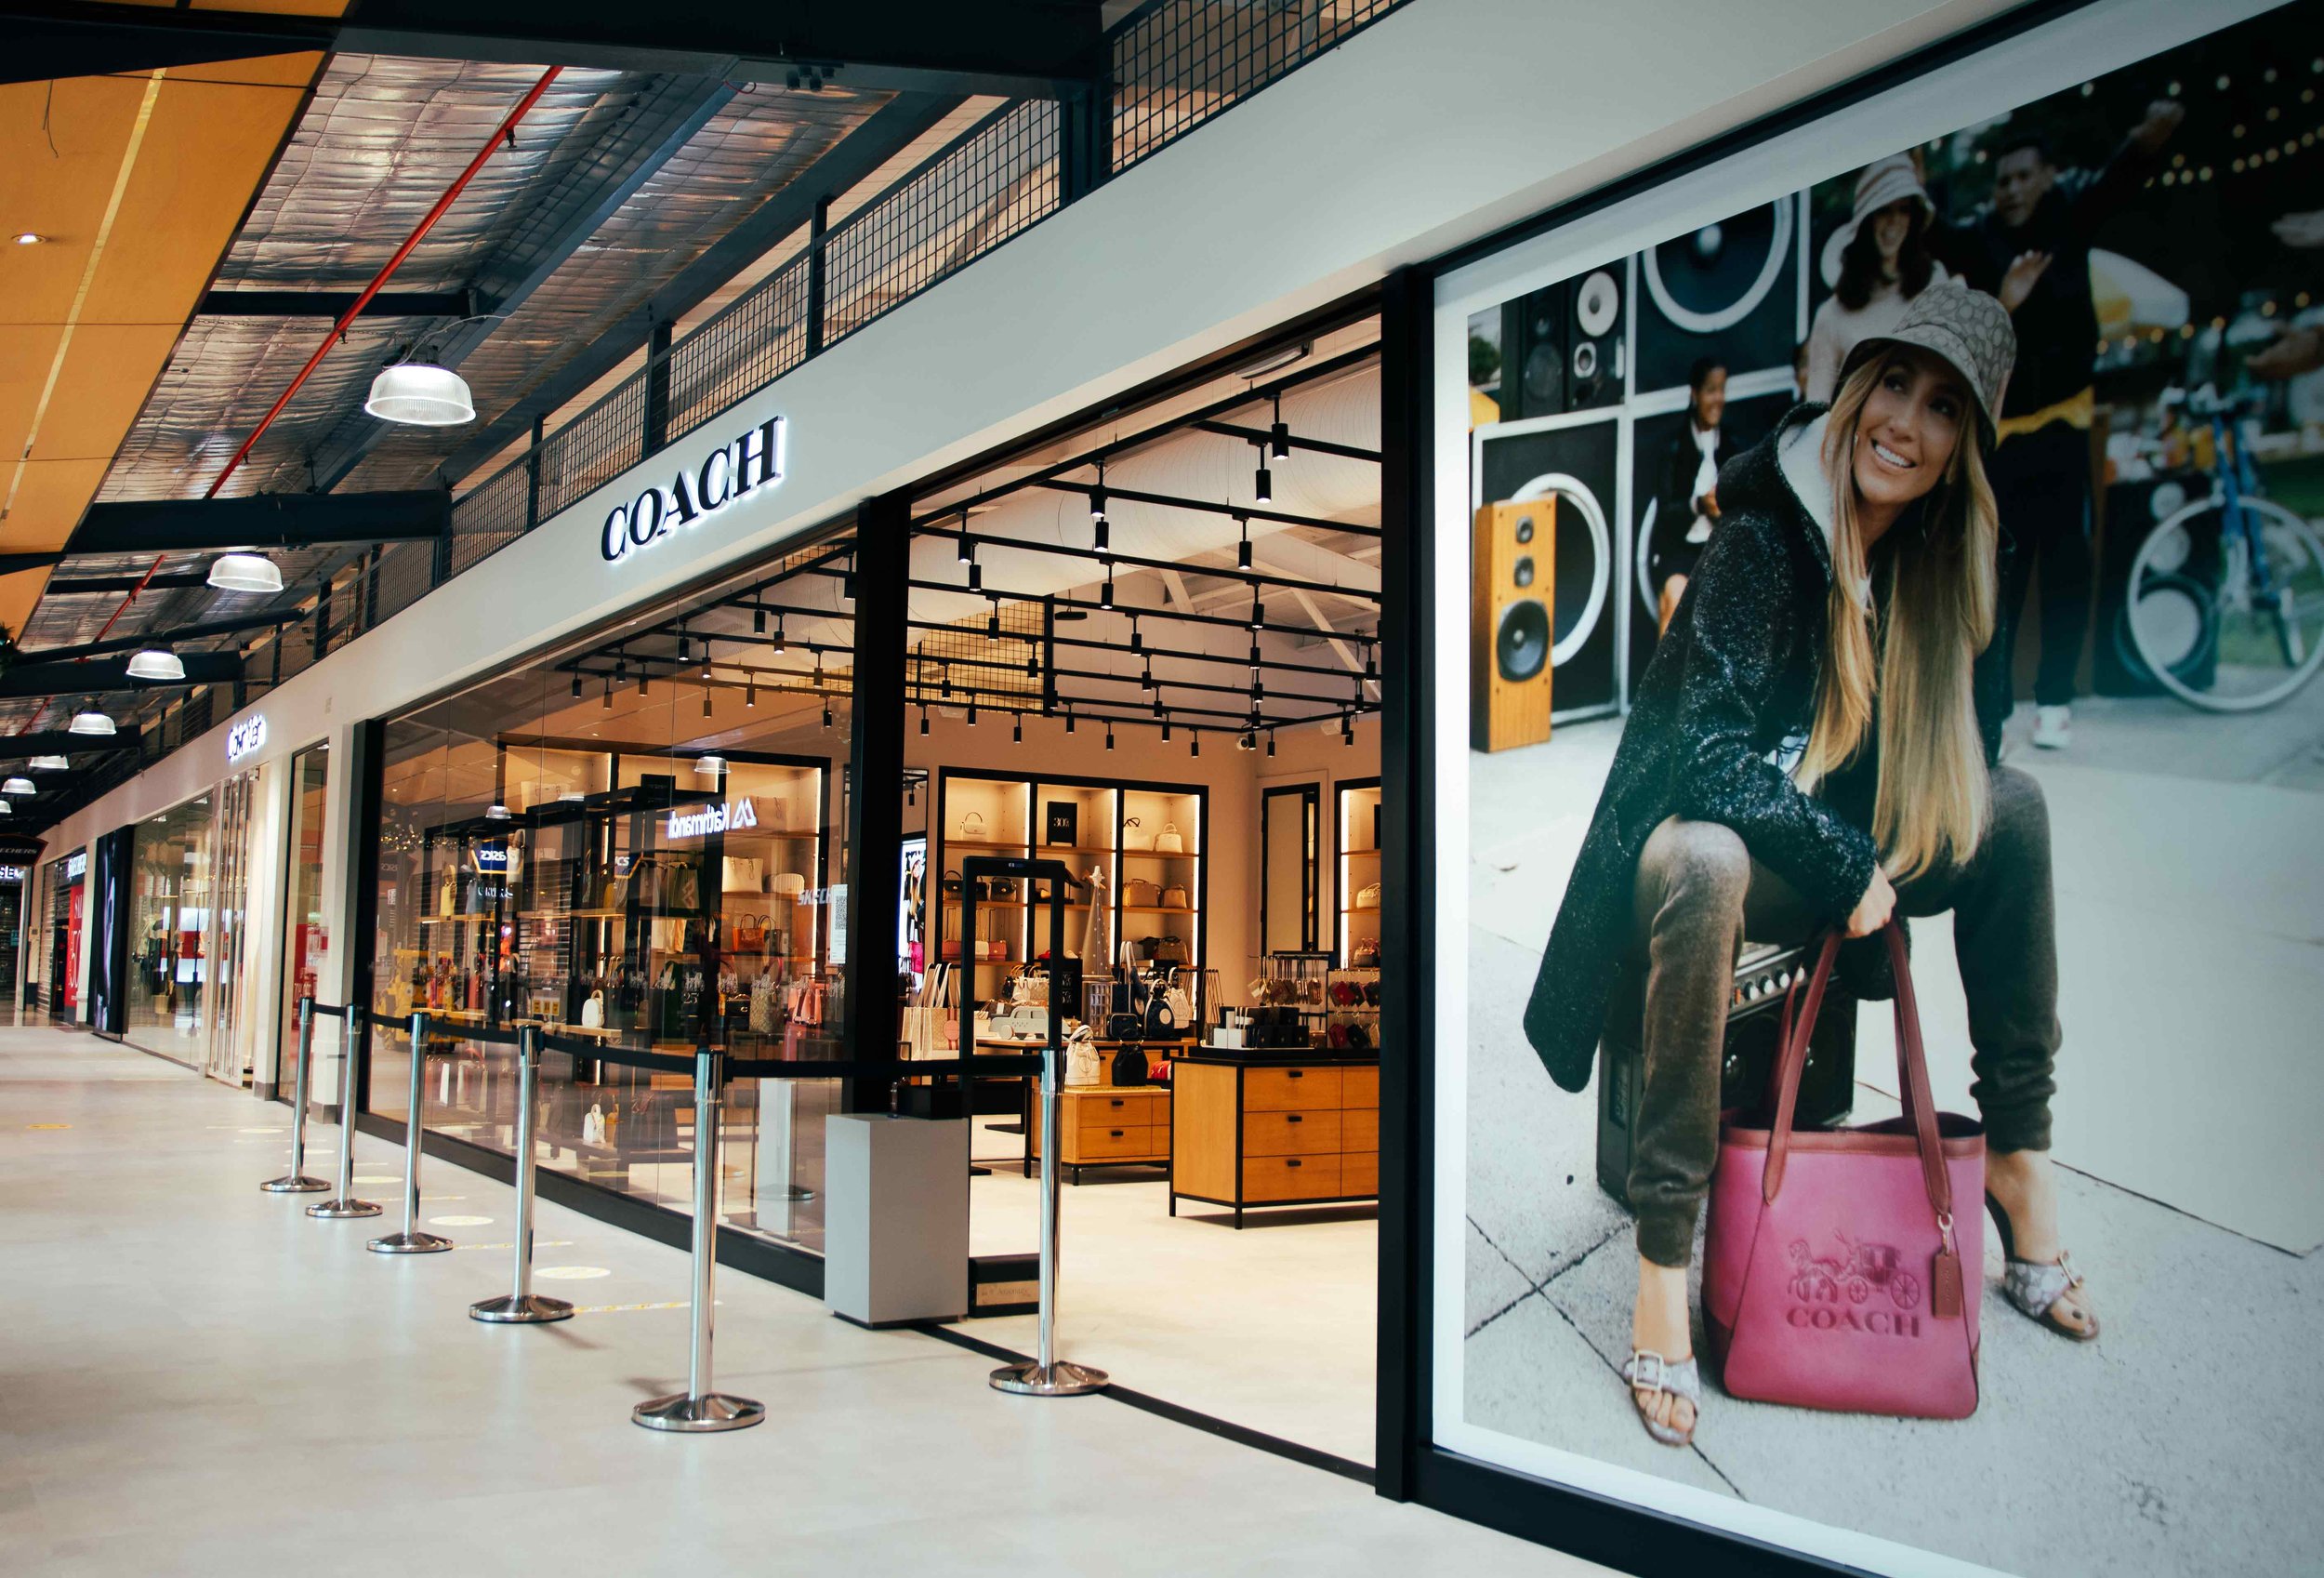 NZ's first Coach outlet store opens in Dress Smart! — Tailor Inc.